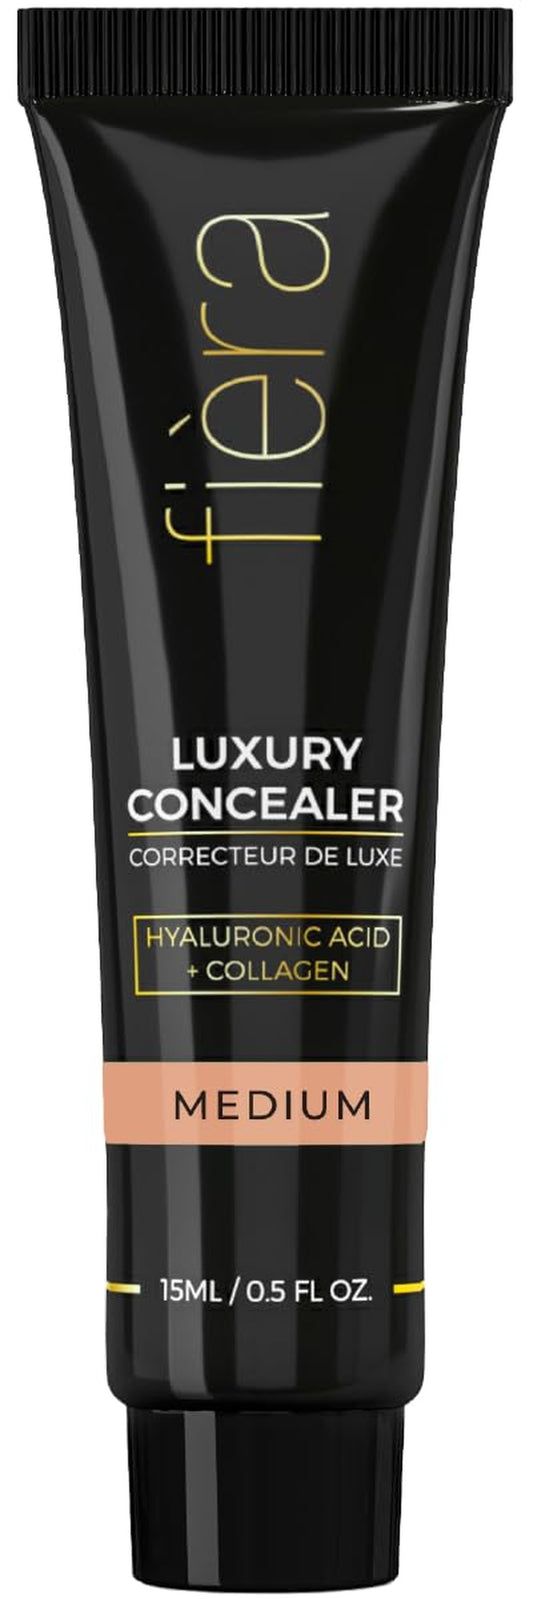 Luxury Concealer with Anti-Aging - All Day Coverage for Dark Circles, Fine Lines, Wrinkles & Spots - Medium, 0.5 Ounce